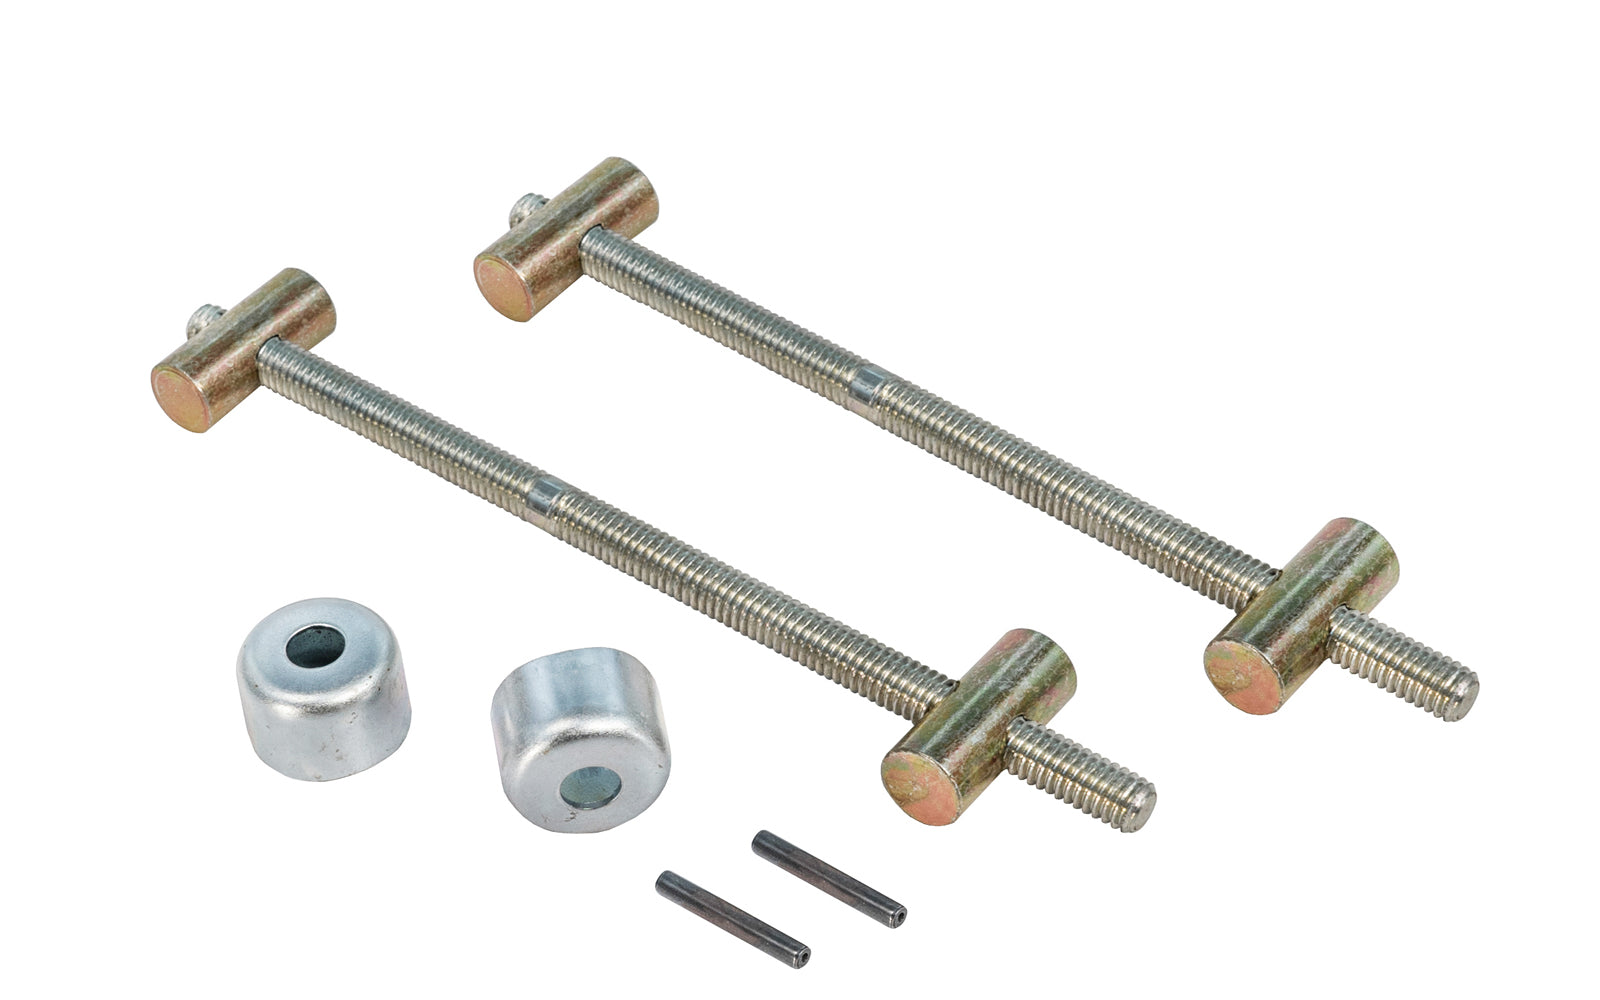 Build your own adjustable handscrew clamp with this kit. This kit is designed for 4" Jaw Length Handscrew Clamps. Spindles & swivel nuts are of cold drawn carbon steel & the threads have double leads for rapid operation & close tolerances. All metal parts are treated to prevent rust. Model 00040 ~ Made in USA ~ 099687000151 